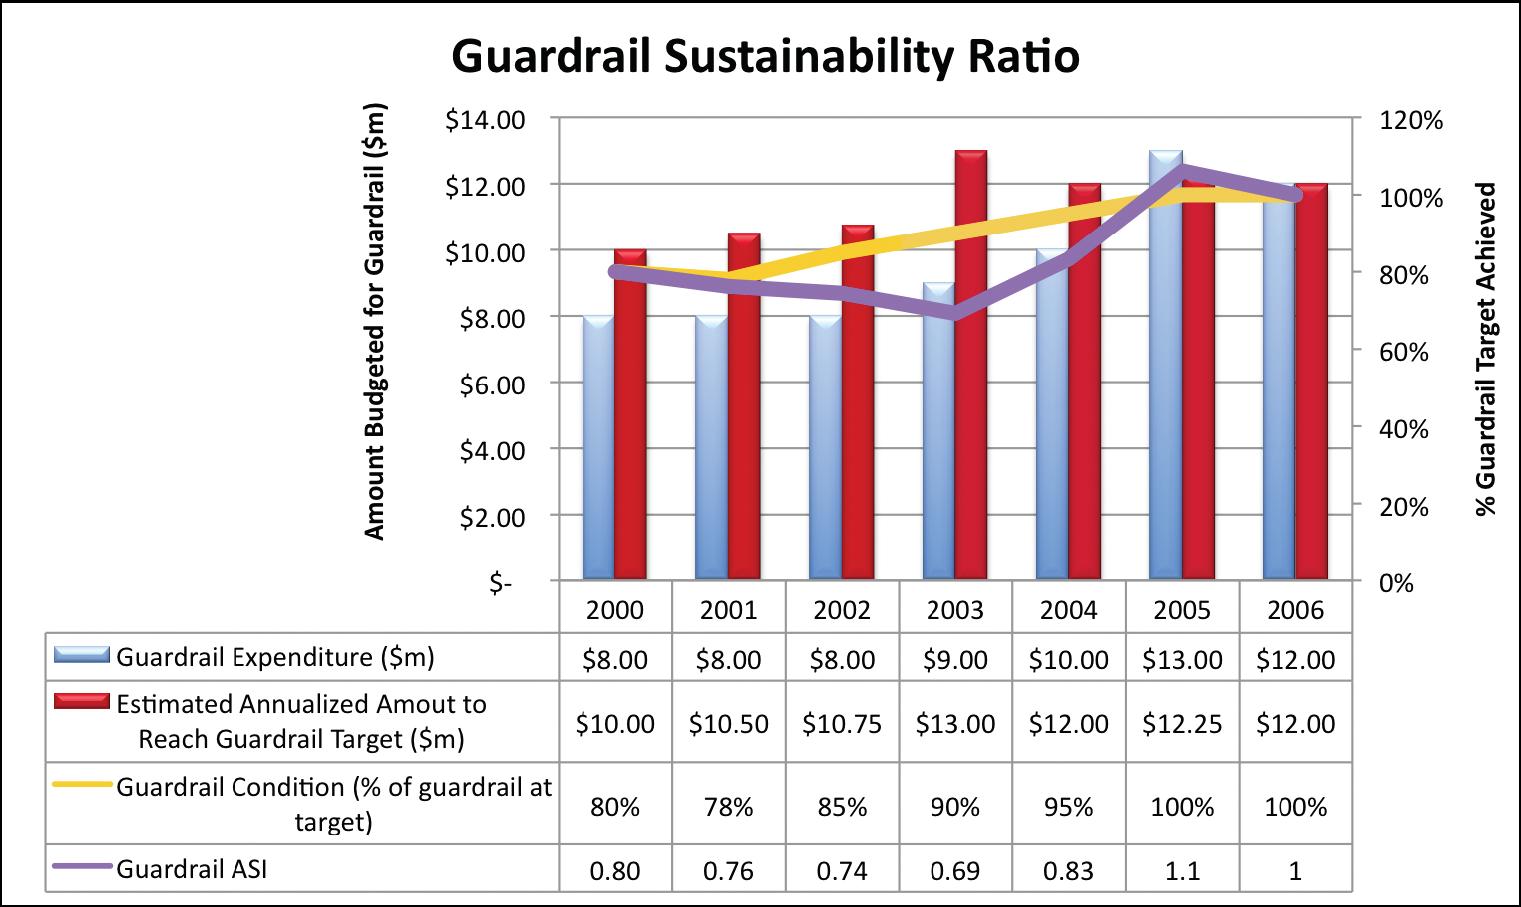 Figure 7 is a combination chart showing a series of bars that represent the amount spent on guardrail compared to the amount needed to sustain guardrail in an acceptable condition.  The purpose of the chart is to demonstrate the consequences of under funding guardrail from 2000 through 2006. Figure 7 illustrates how for a theoretical example used for illustrative purposes that as the amount spent on guardrail is less than the amount needed, the gap between need and budget grows.  A second axis illustrates with a trendline the declining condition of the guardrail as the investment lags.  The guardrail condition declines from 80 percent meeting condition target in 2000 to only 78 percent meeting target in 2001. As investment increases in 2002 and 2003, the condition of the guardrail improves until by 2006, 100 percent of the guardrail meets the condition target. Running in parallel to the condition line is another line illustrating the sustainability ratio for guardrail. It illustrates that as spending is increased, the sustainability ratio for guardrail rises from a low of point 74 to a high of 1.0.  